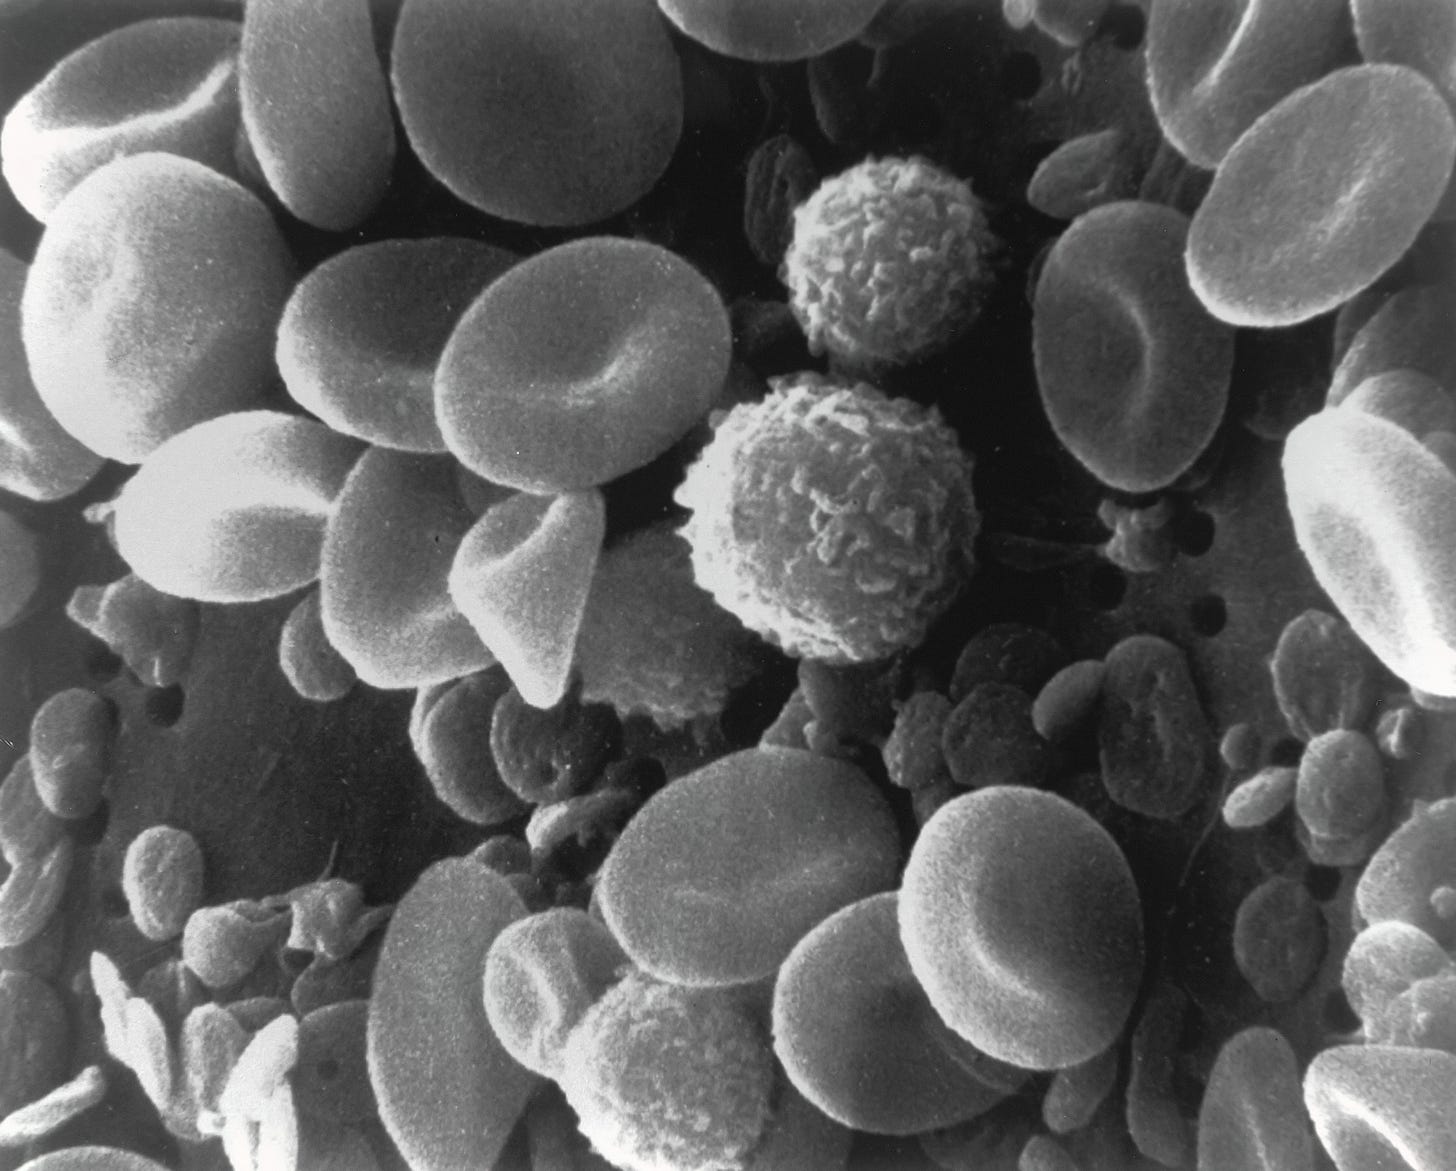 Electron microscope scan of blood, showing a bunch of grayscale blobs.